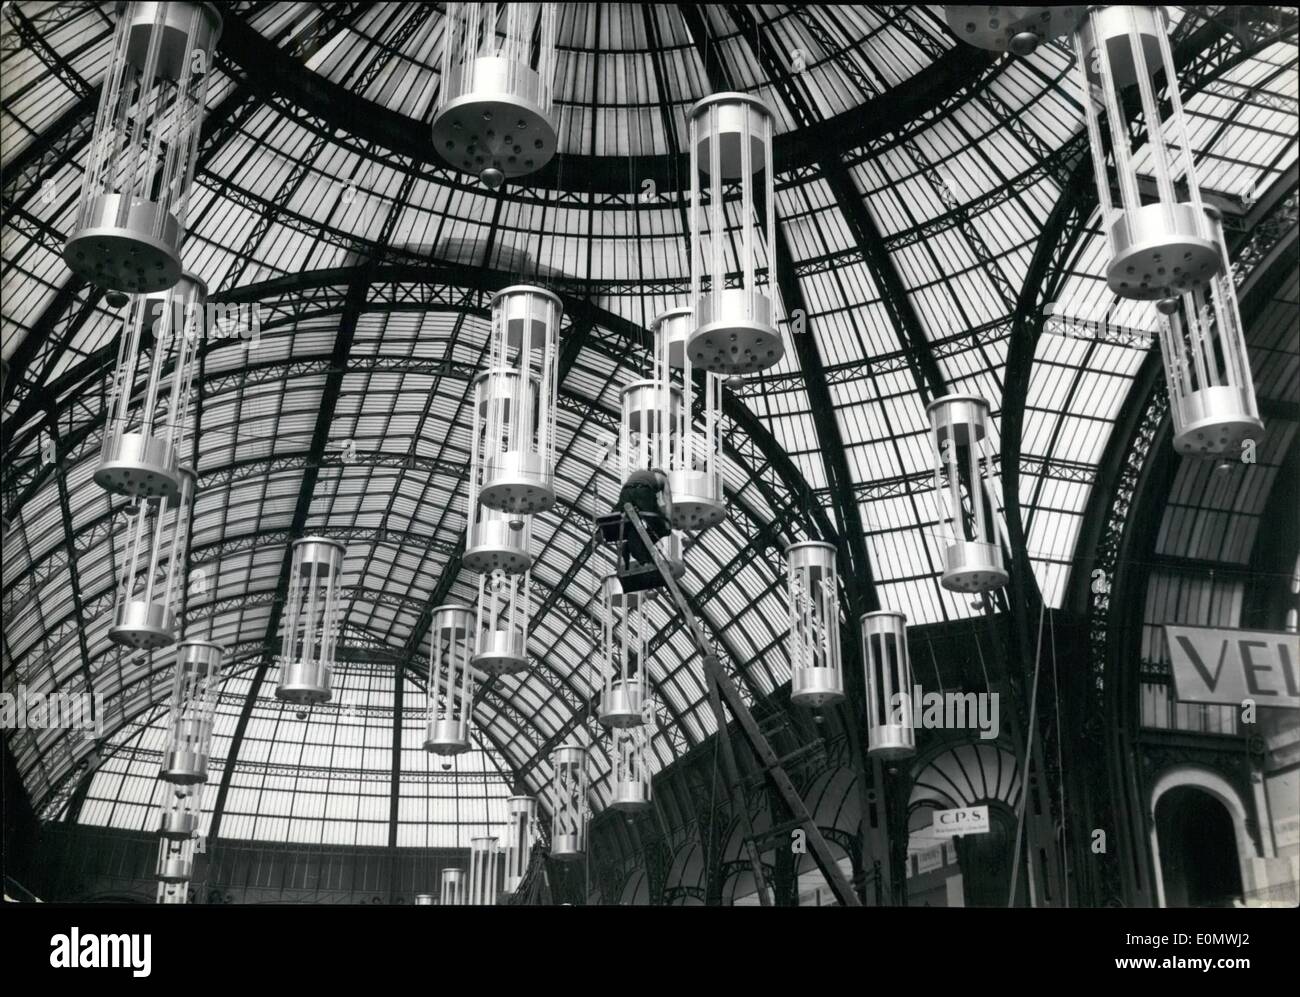 Sep. 09, 1956 - NEW LIGHTING FOR PARIS MOTOR SHOW: THE MOTOR SHOW 1956 WILL SHORTLY OPEN AT THE GRAND PALAIS PARIS. CHANDELIERS Stock Photo